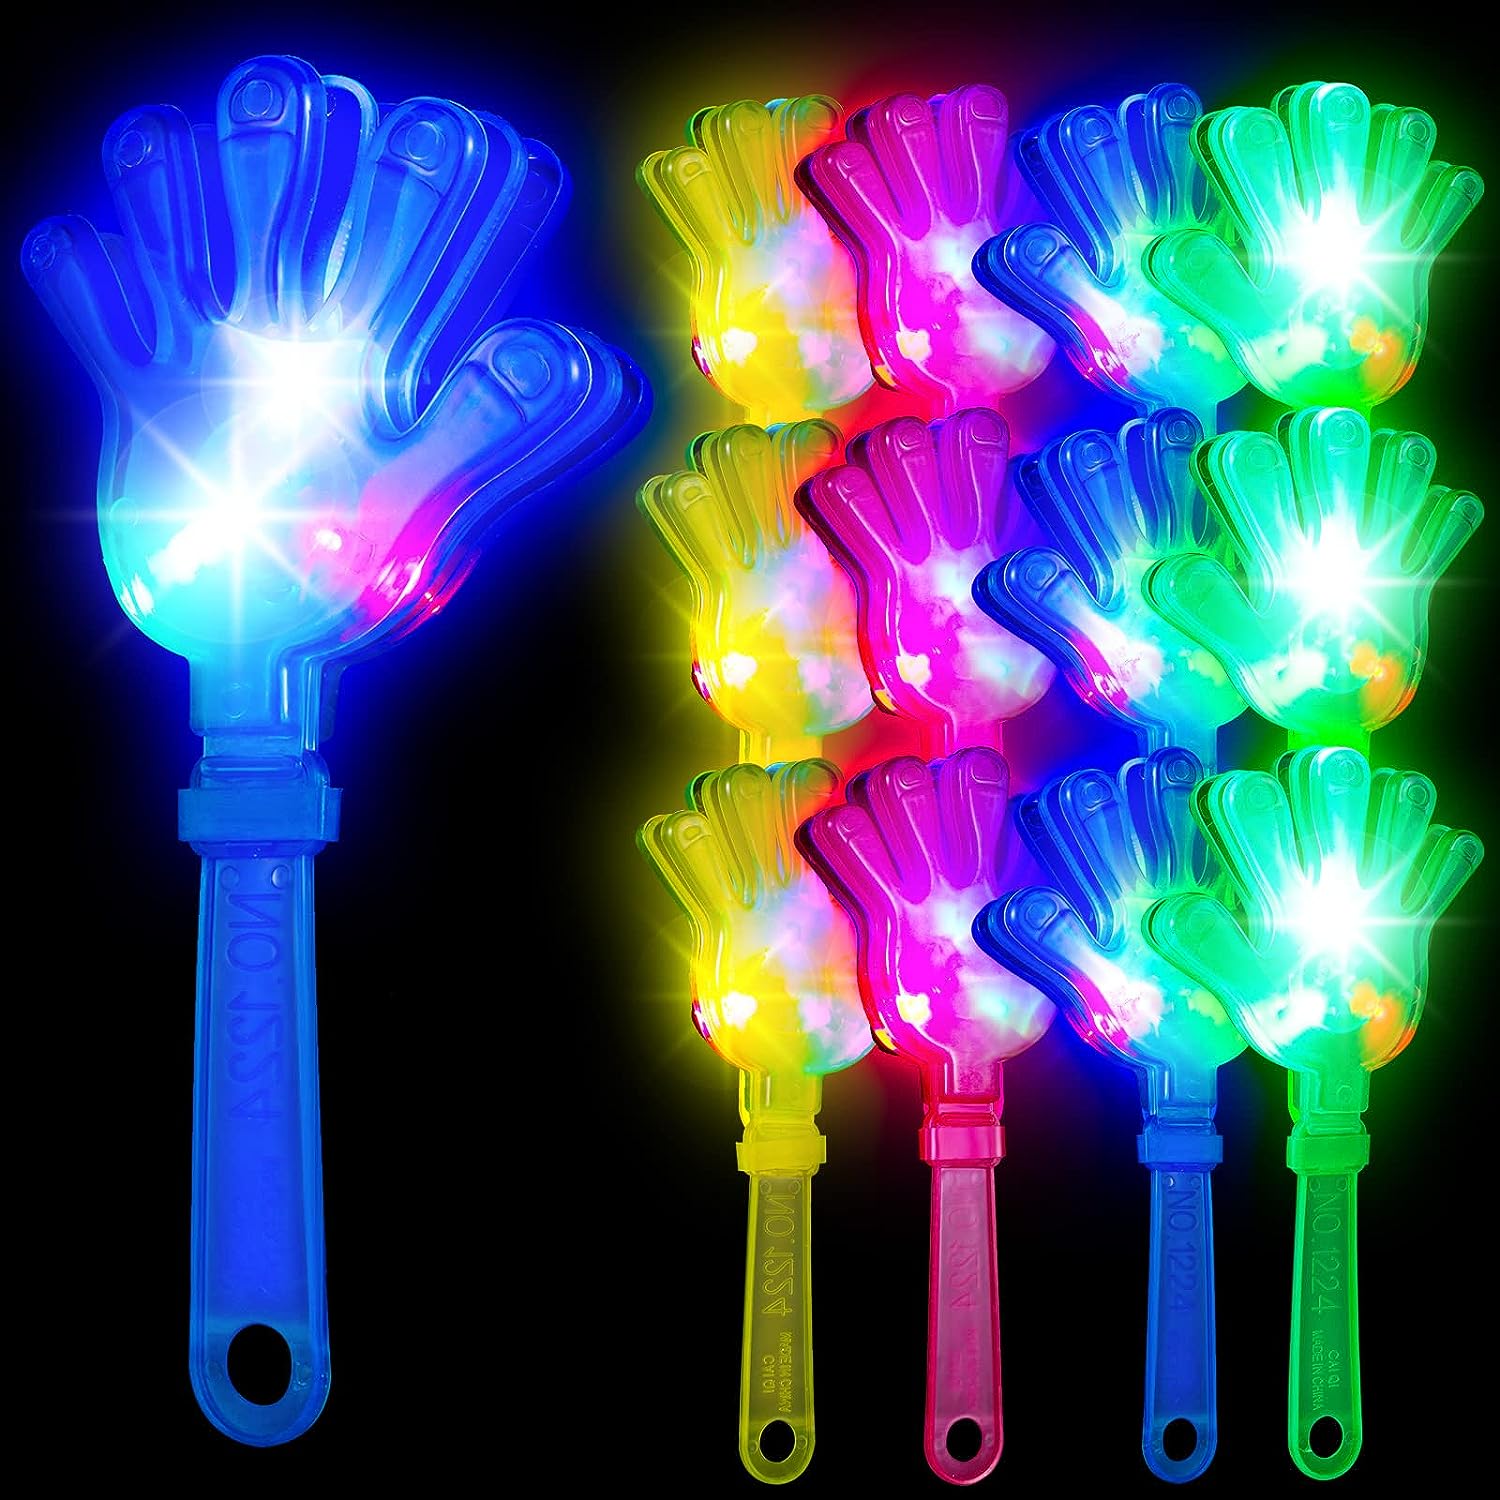 Hand Clappers 9.5 Inch Light up LED Noisemakers Loud Noise Maker Toy Clap Toys for Fiesta Birthday Party Favors Supplies